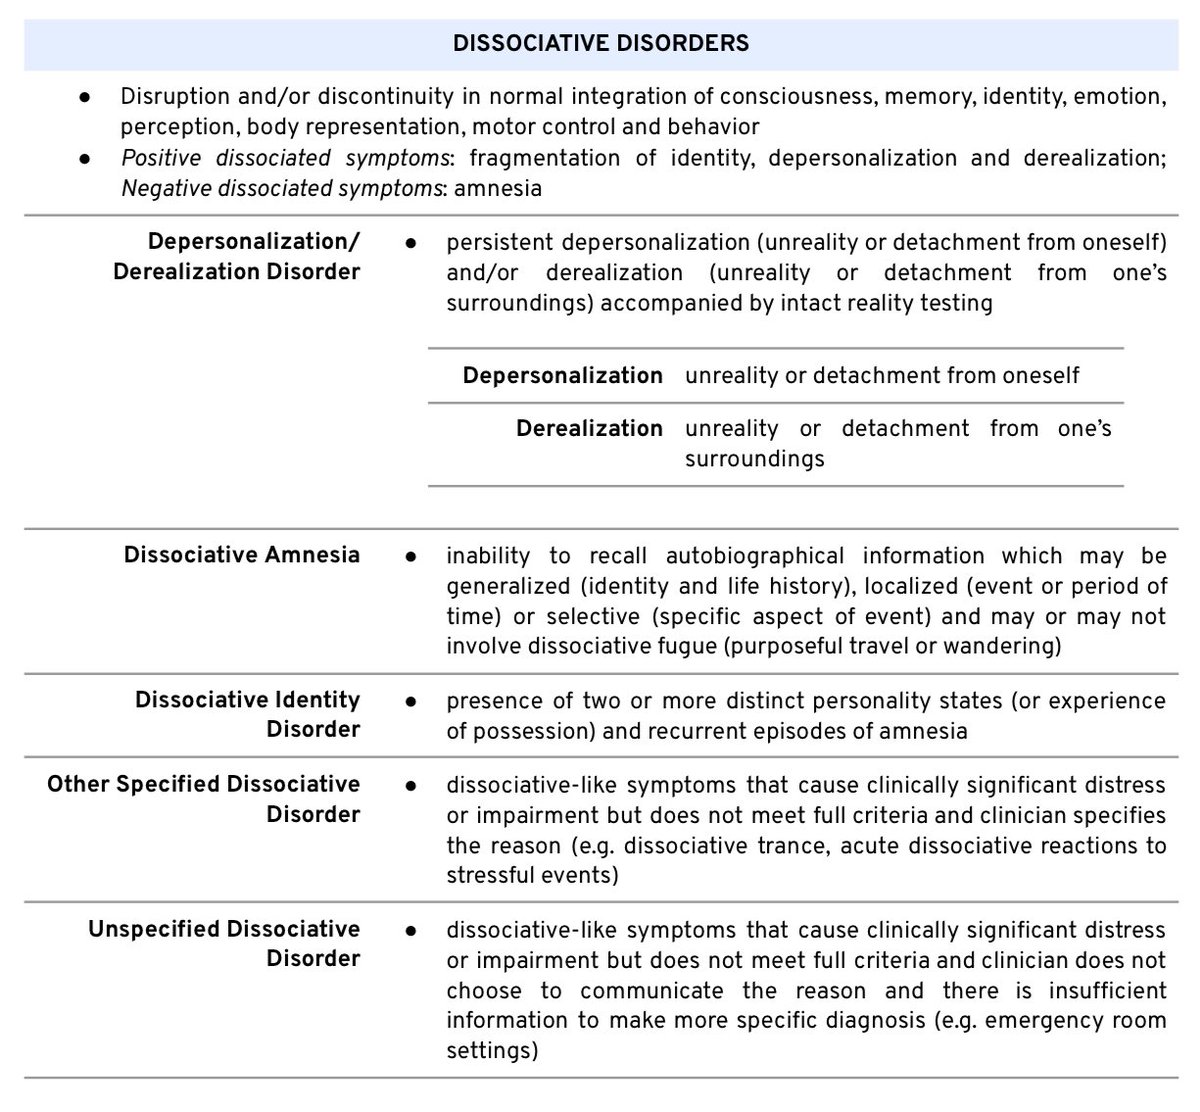 🔴 Somatic Symptom & Related Disorders
🔴 Dissociative Disorders

— from undergrad notes; for quick read only